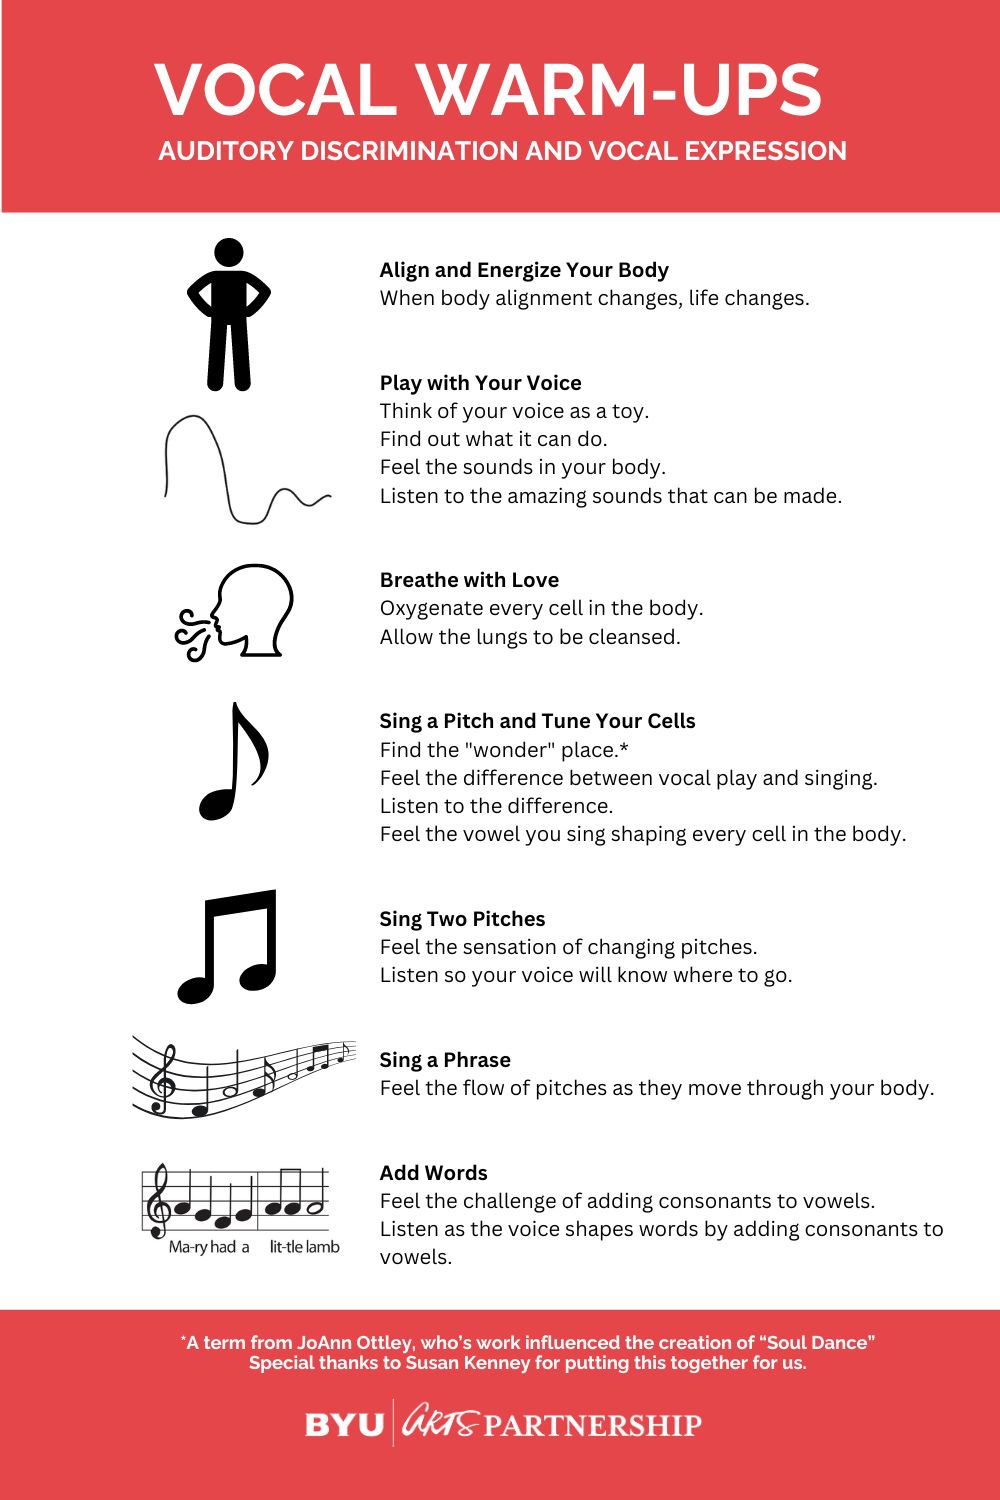 Vocal warm up infographic